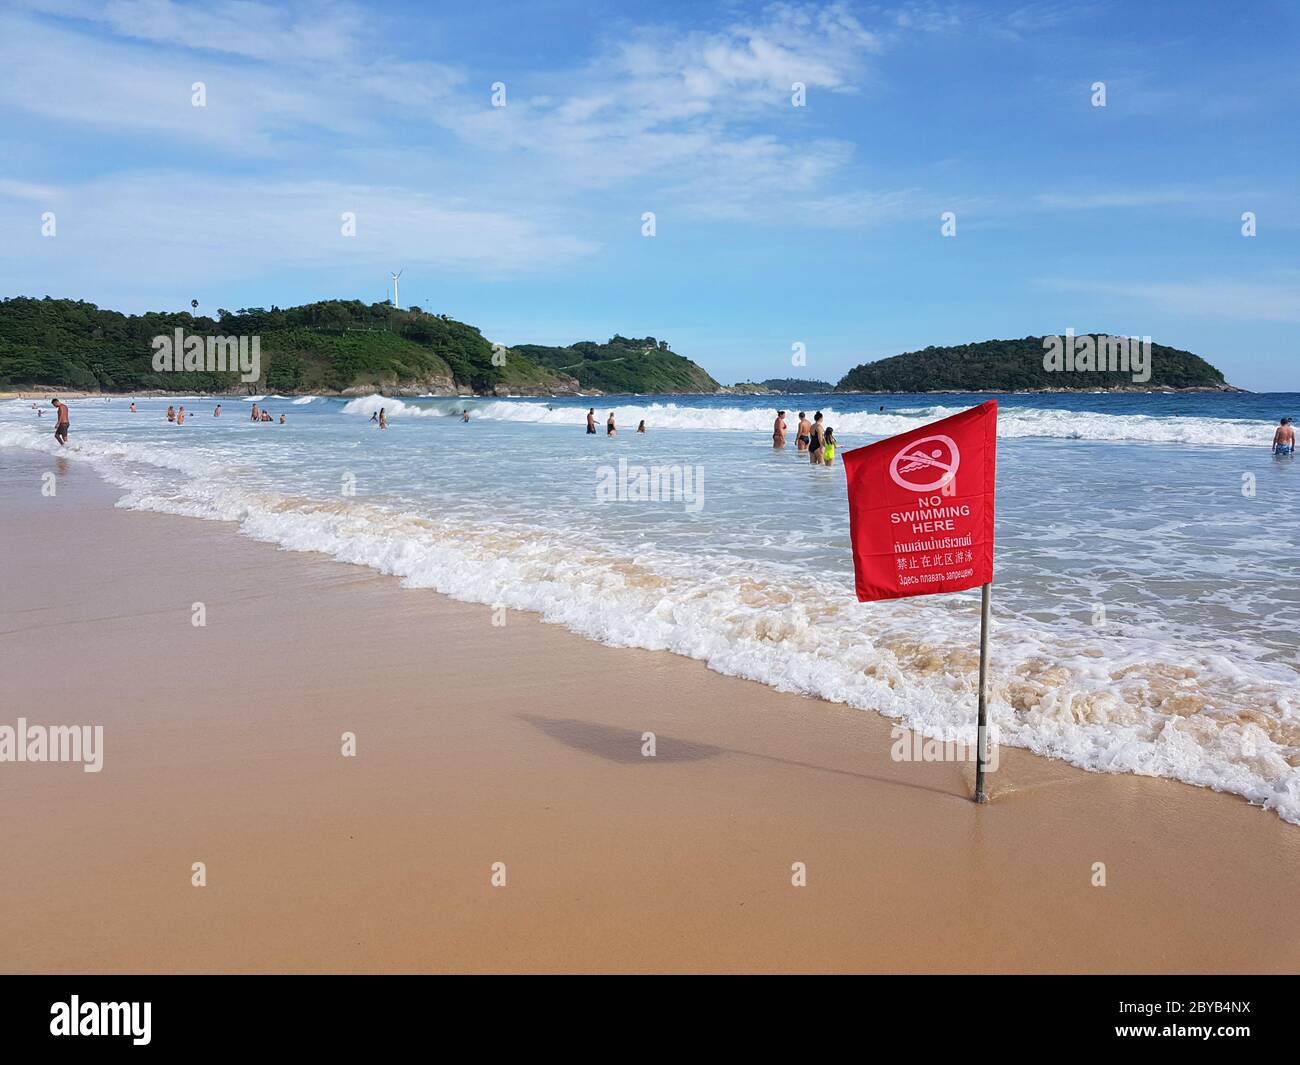 No swimming sign flaf for security information on the beach Stock Photo